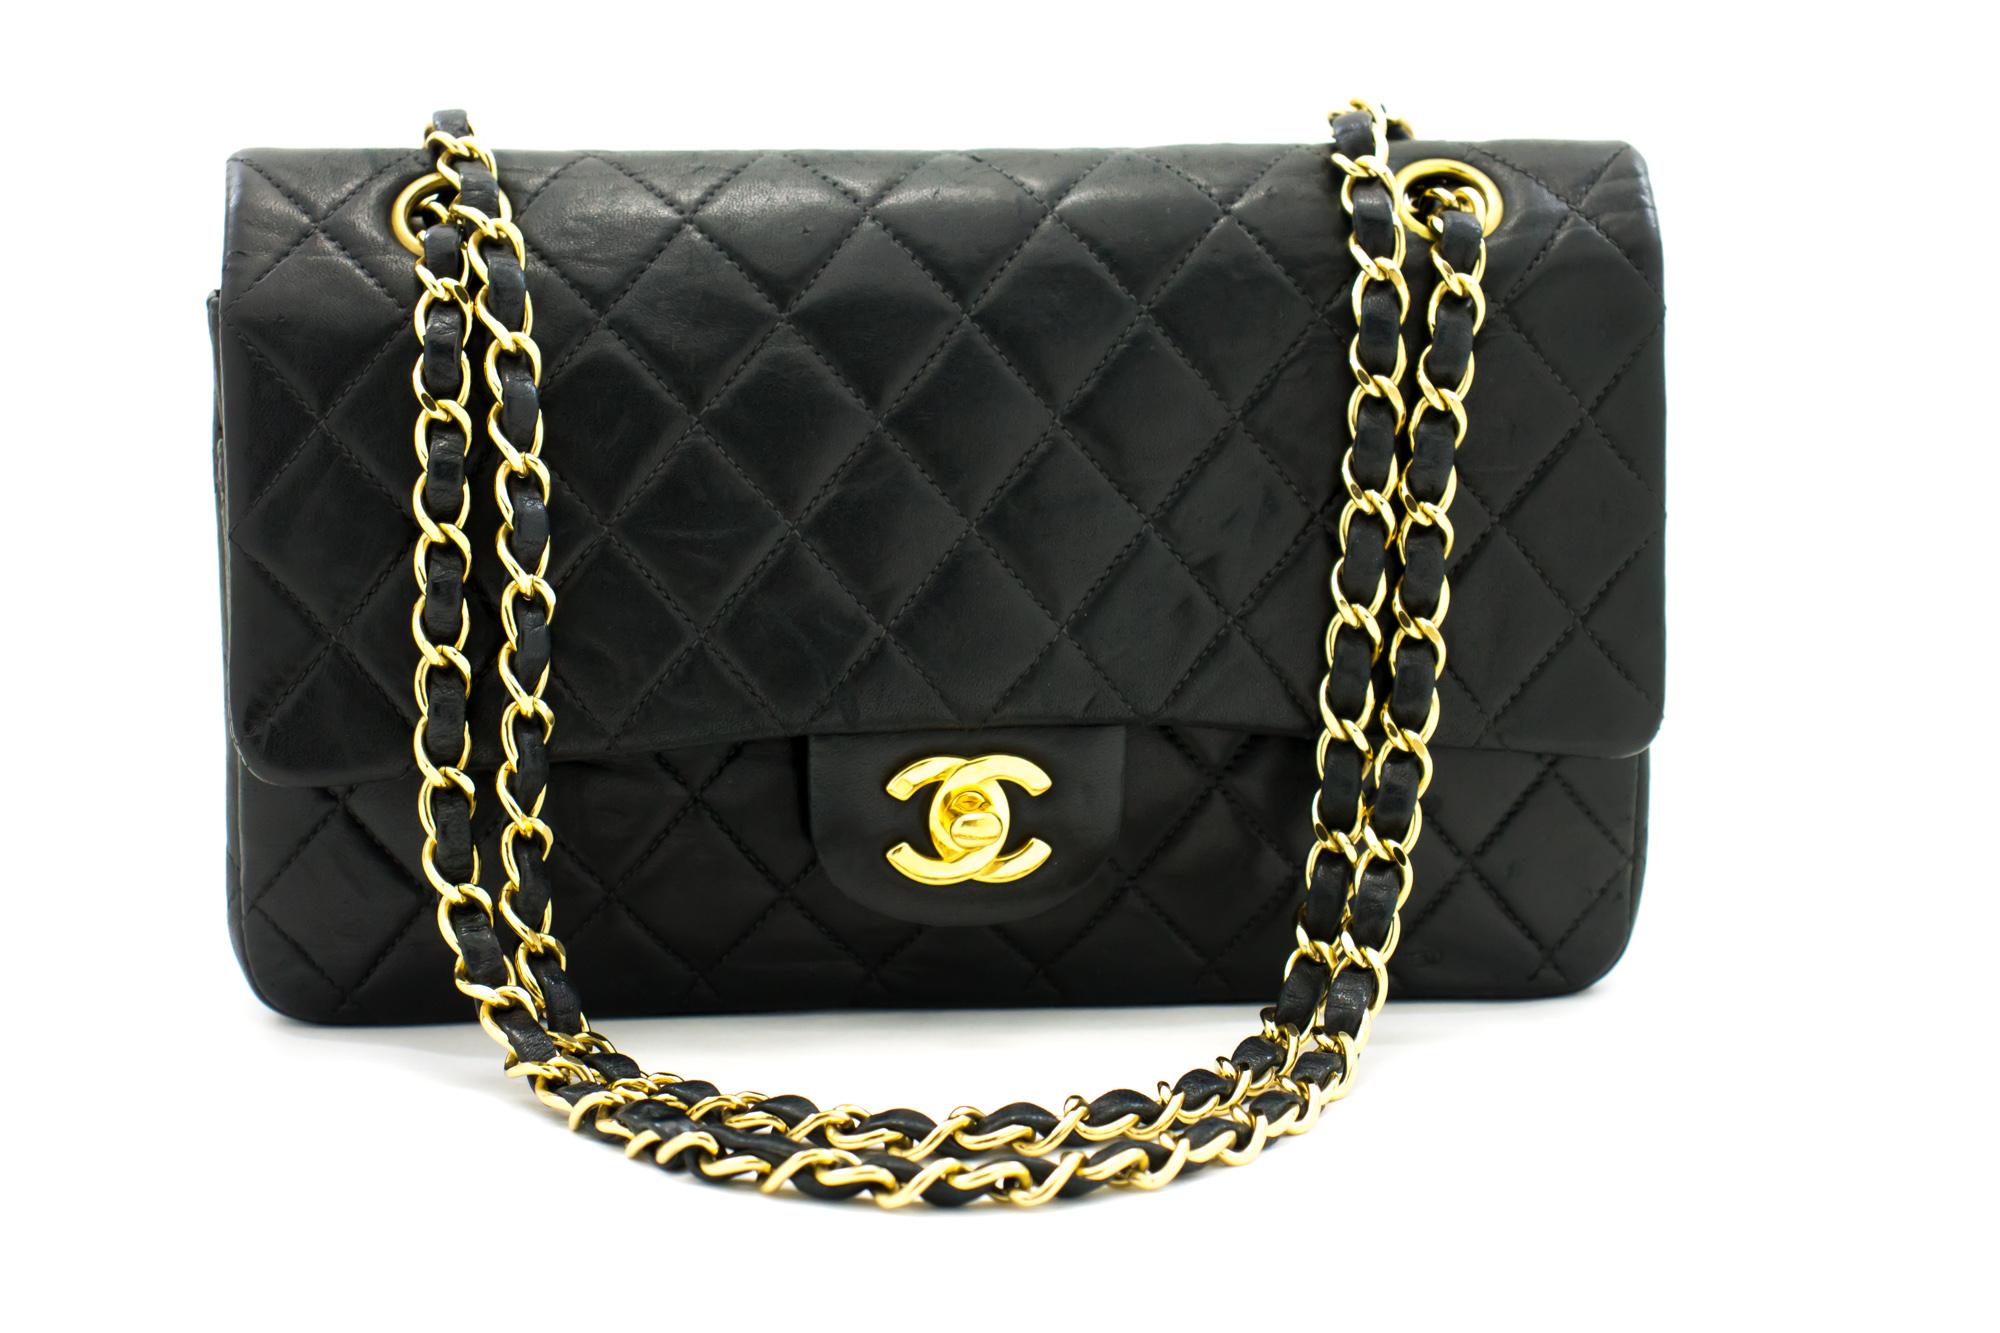 An authentic CHANEL 2.55 Classic Double Flap Medium Chain Shoulder Bag Black made of black Lambskin. The color is Black. The outside material is Leather. The pattern is Solid. This item is Vintage / Classic. The year of manufacture would be 2000-2 0